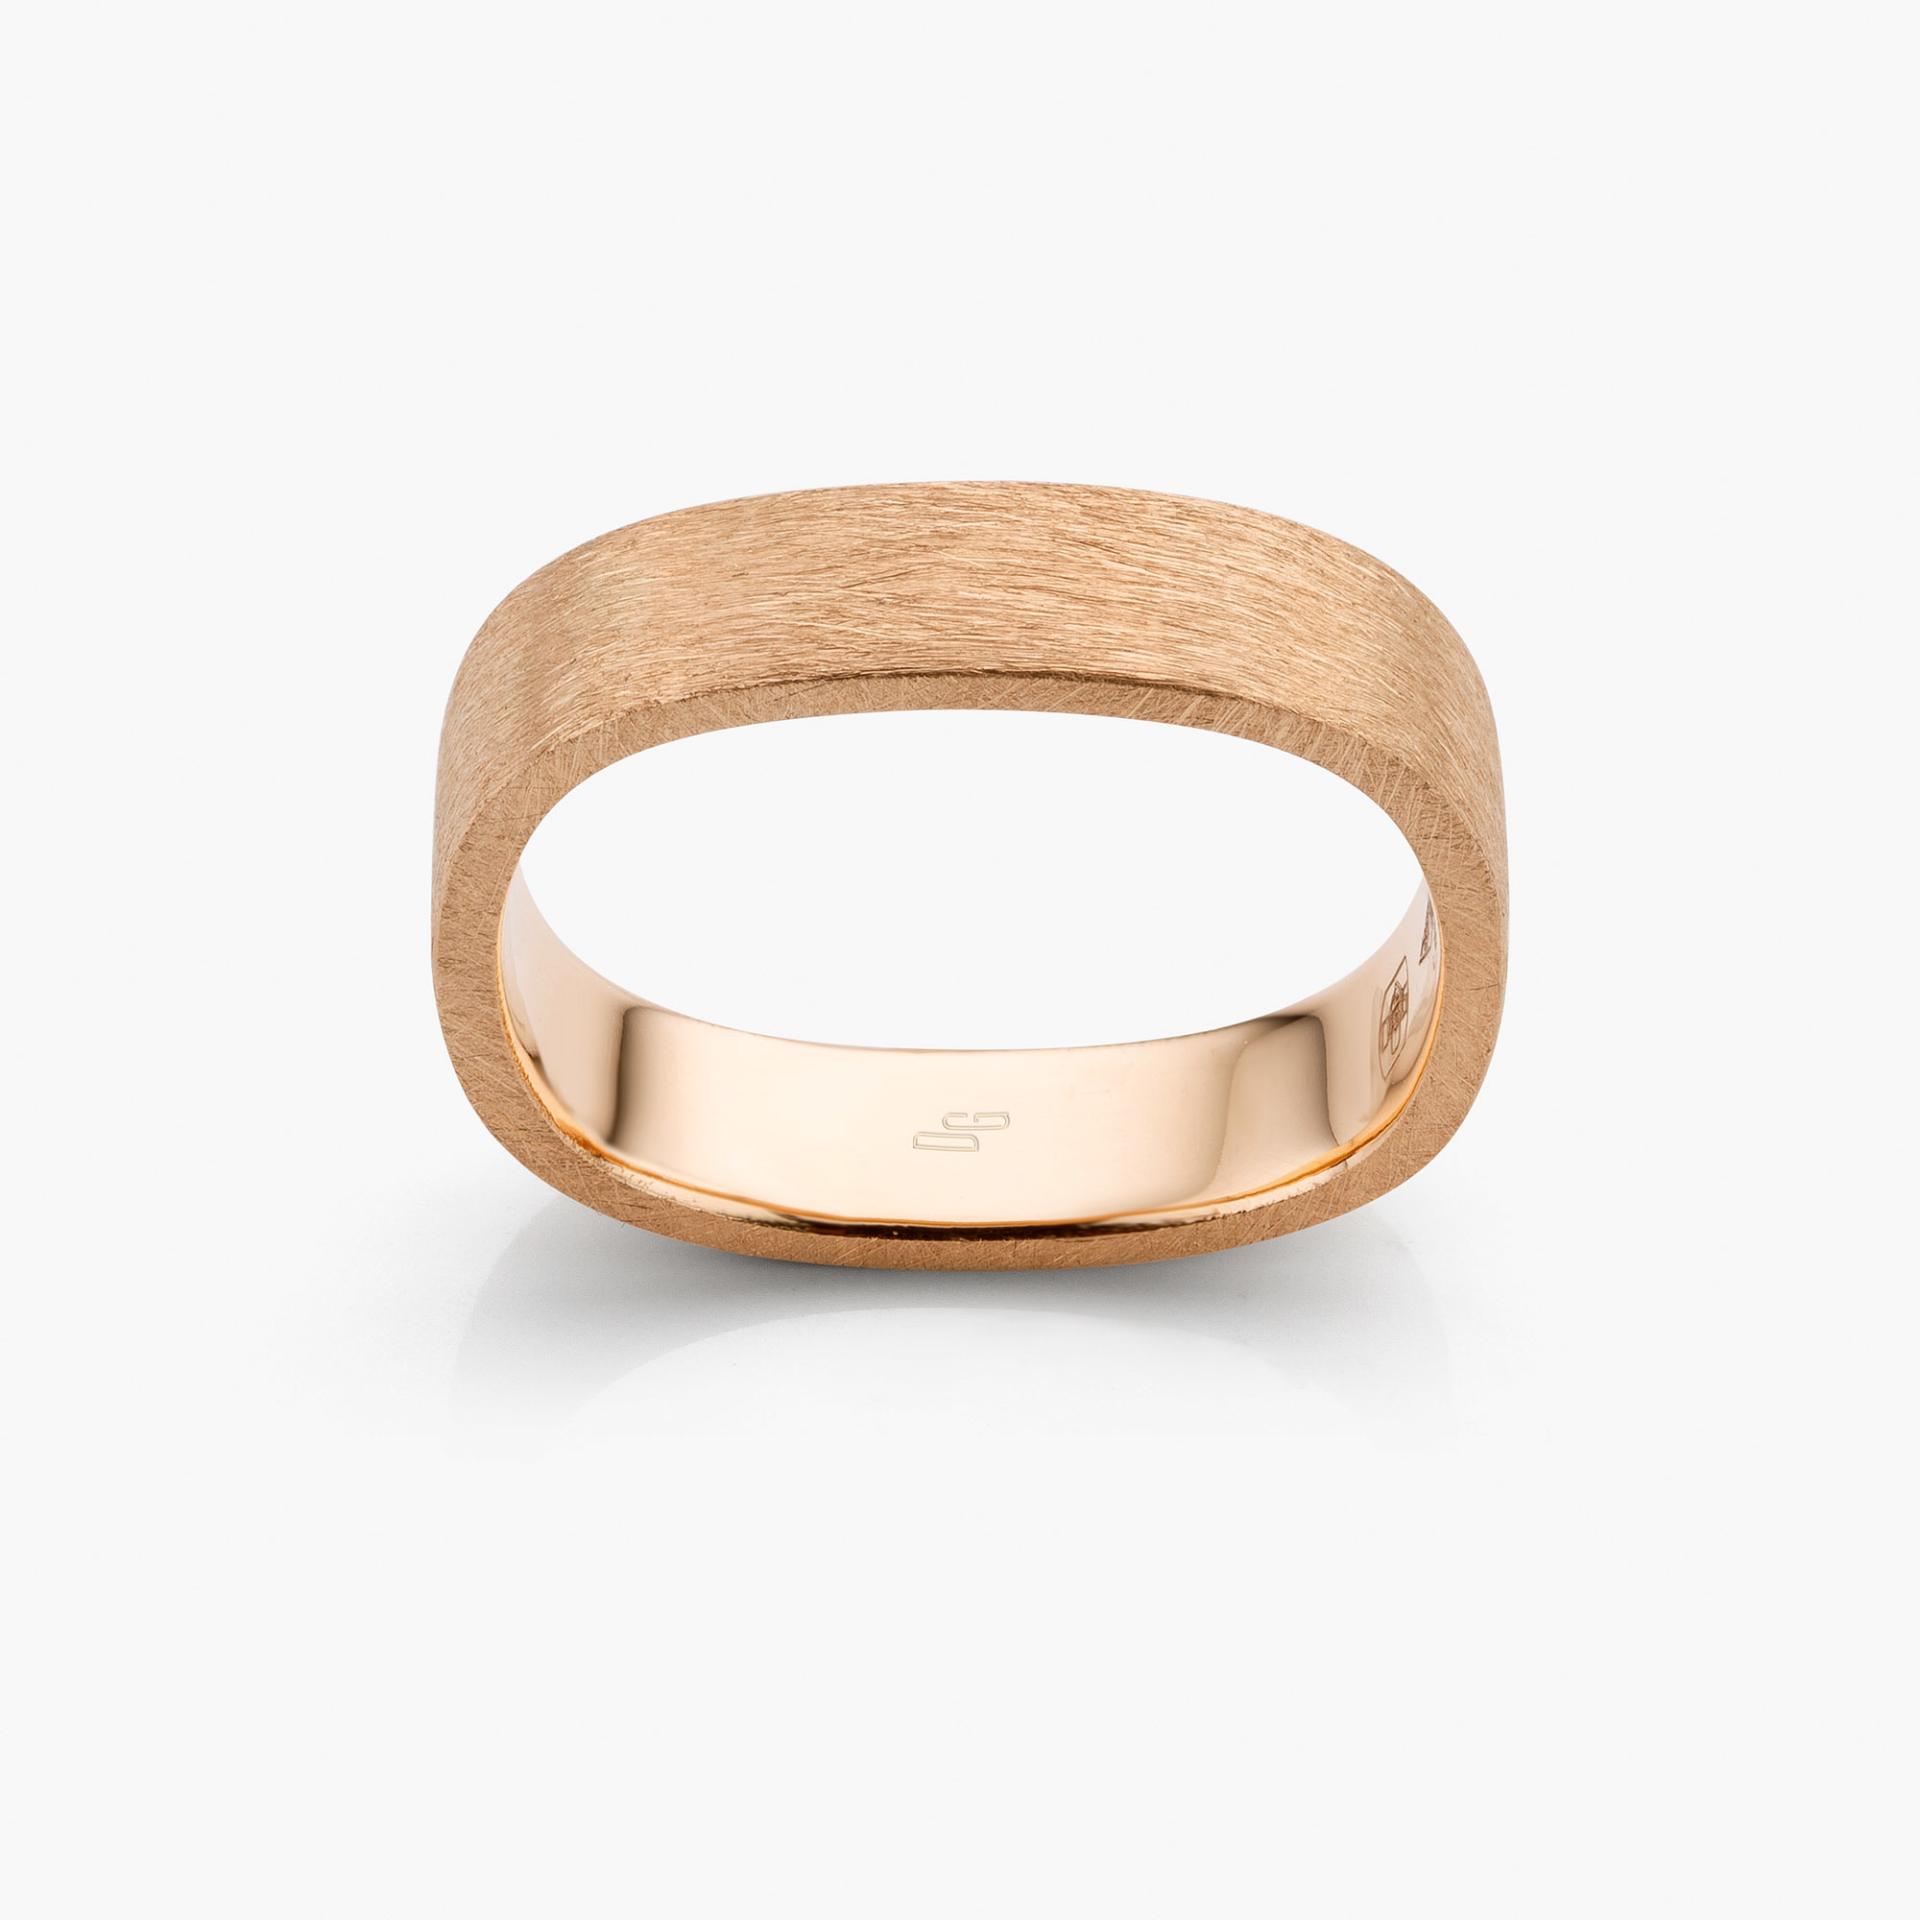 Wedding ring Bold model made by Maison De Greef